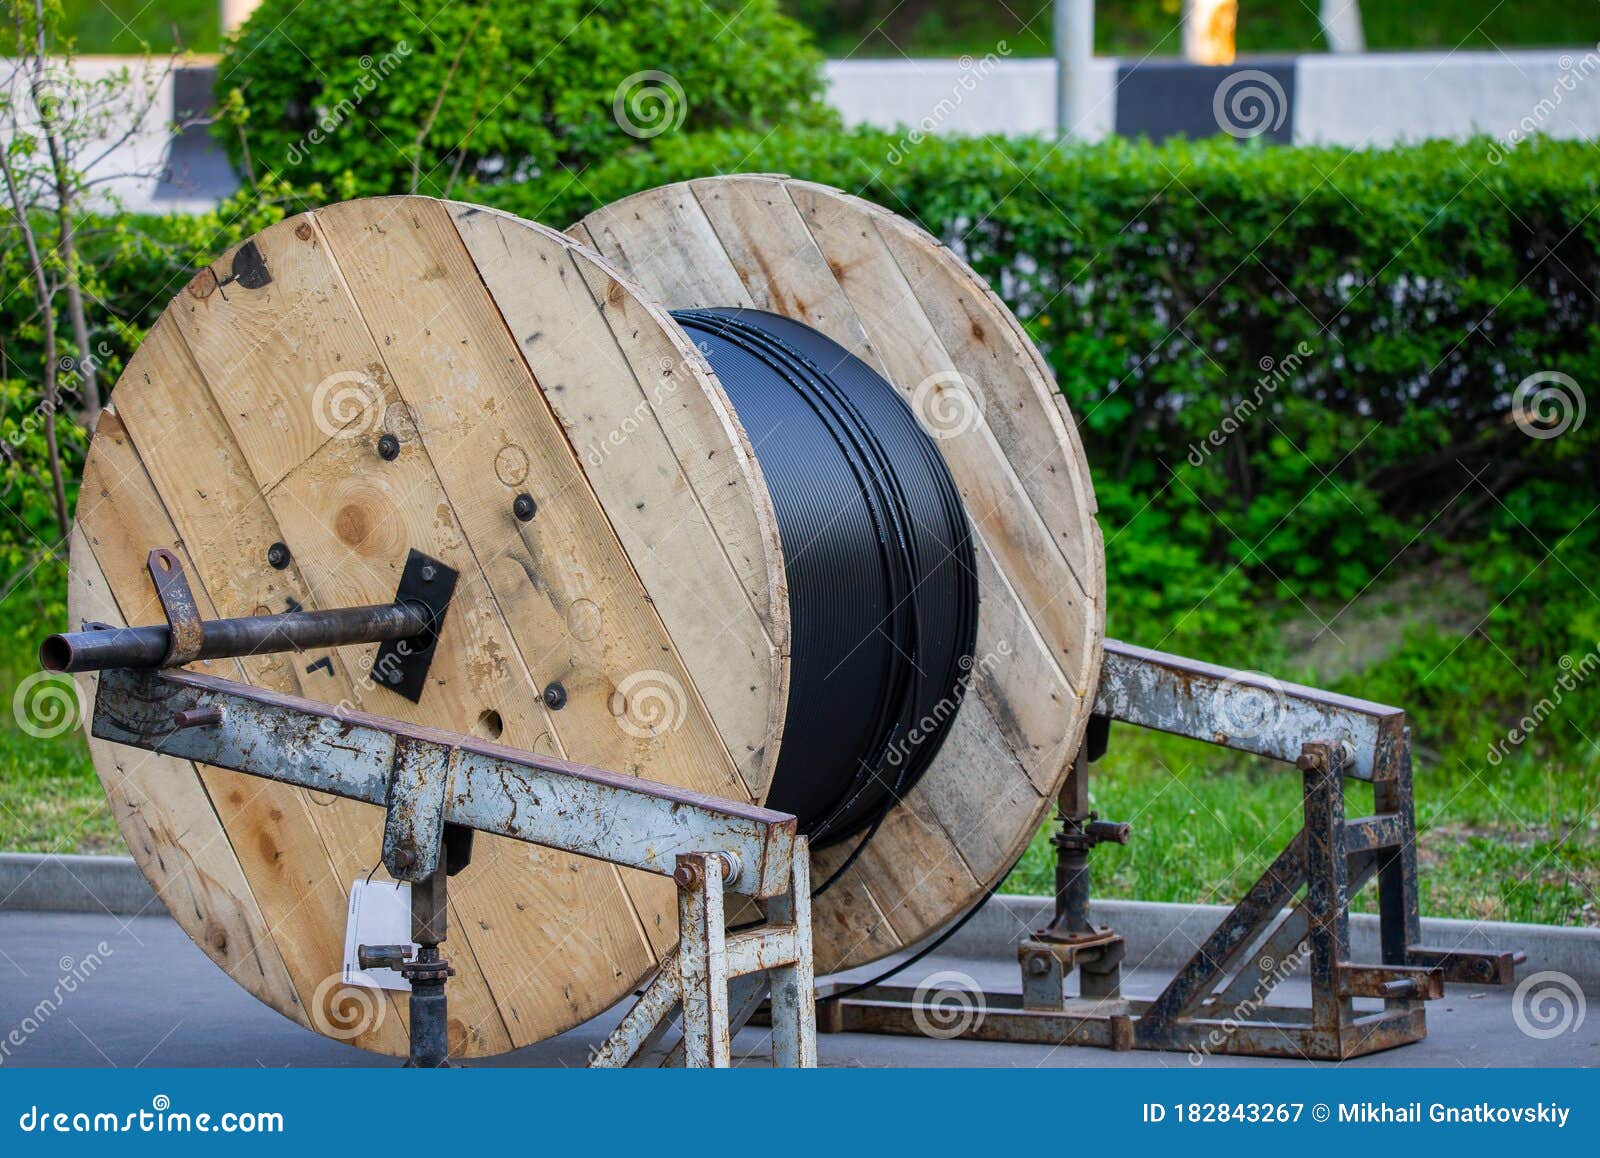 Cable Drum, Fiber-optic and Technology Stock Image - Image of spool, blue:  182843267